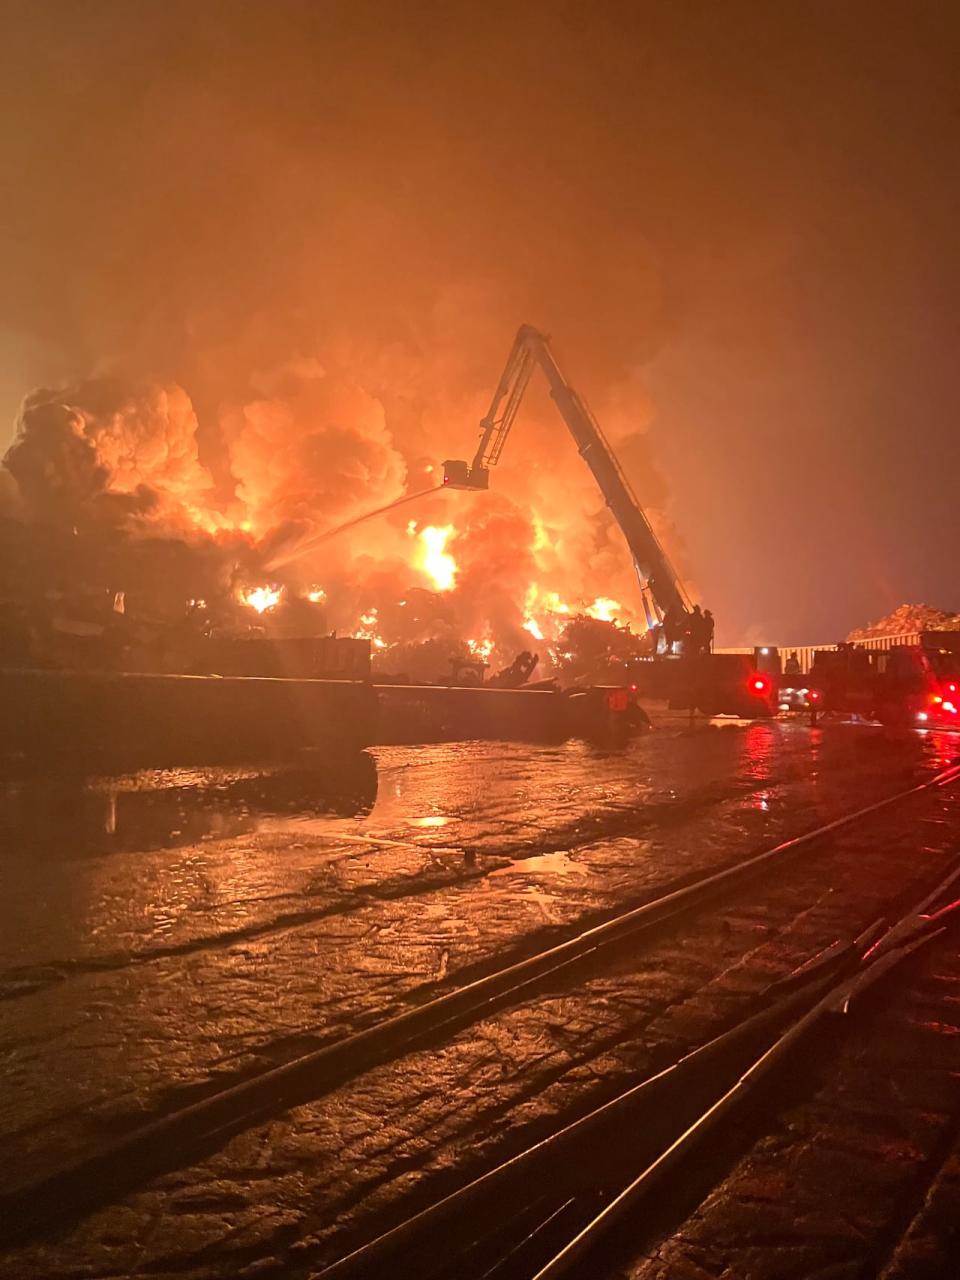 Piles of scrap metal at AIM's west side operation caught fire at around 1 a.m. on Sept. 14. Over the next 40 hours, Saint John firefighters used about two million litres of water to battle the blaze.